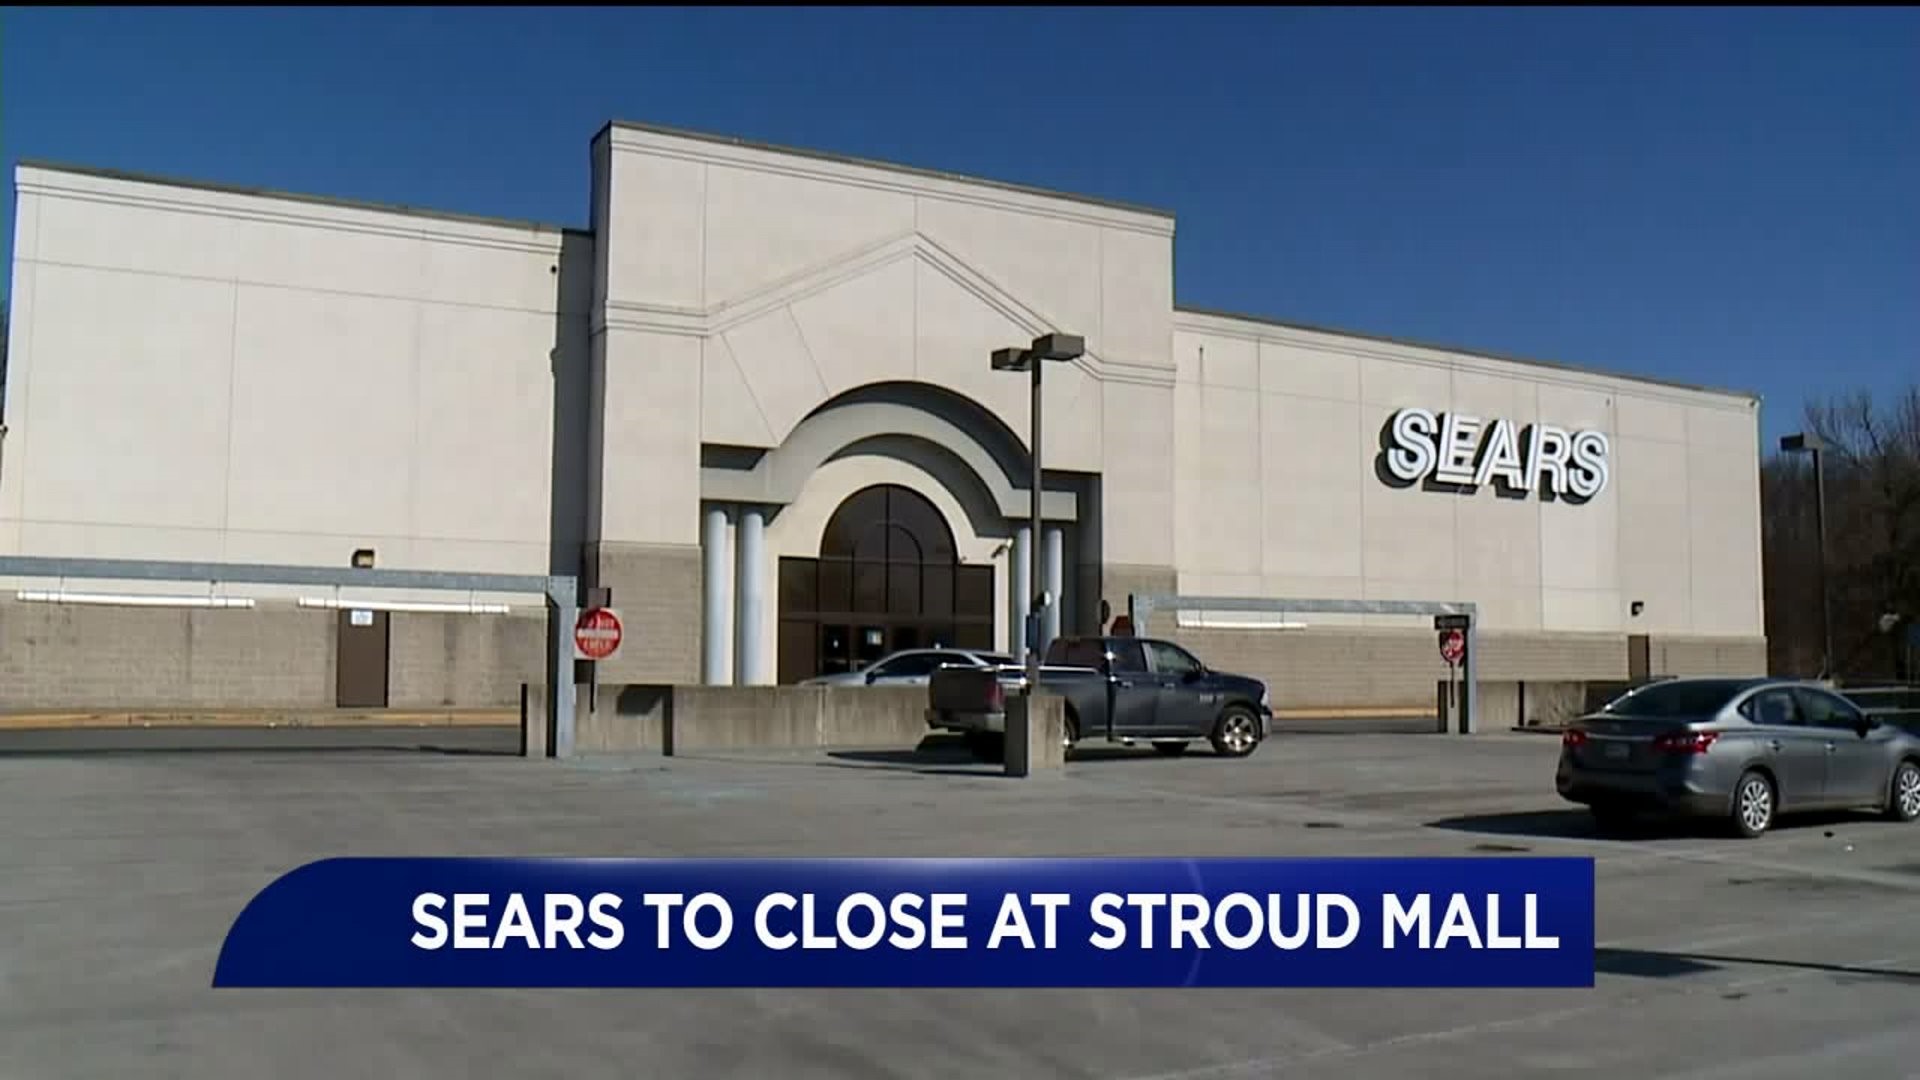 Sears Closing 40 More Stores Including One in Monroe County